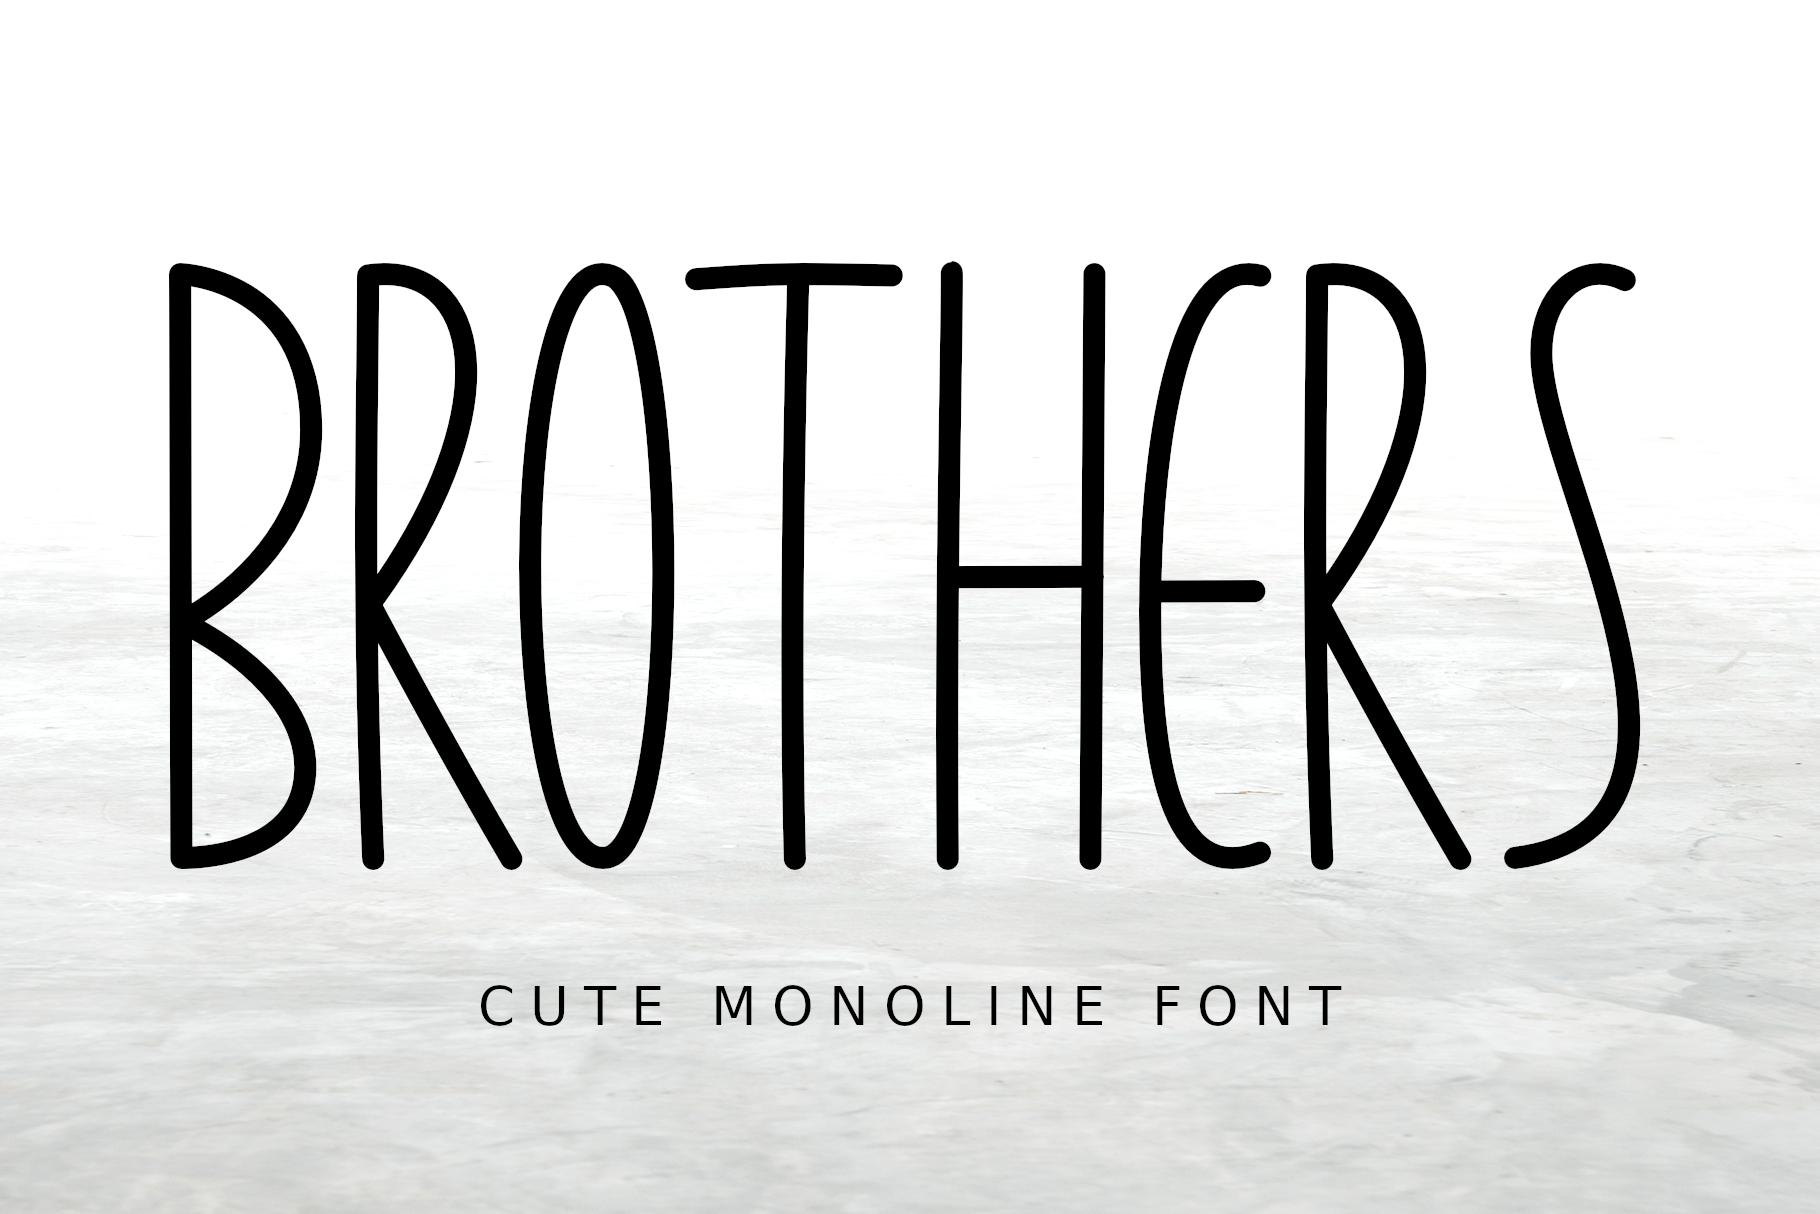 Brothers Font